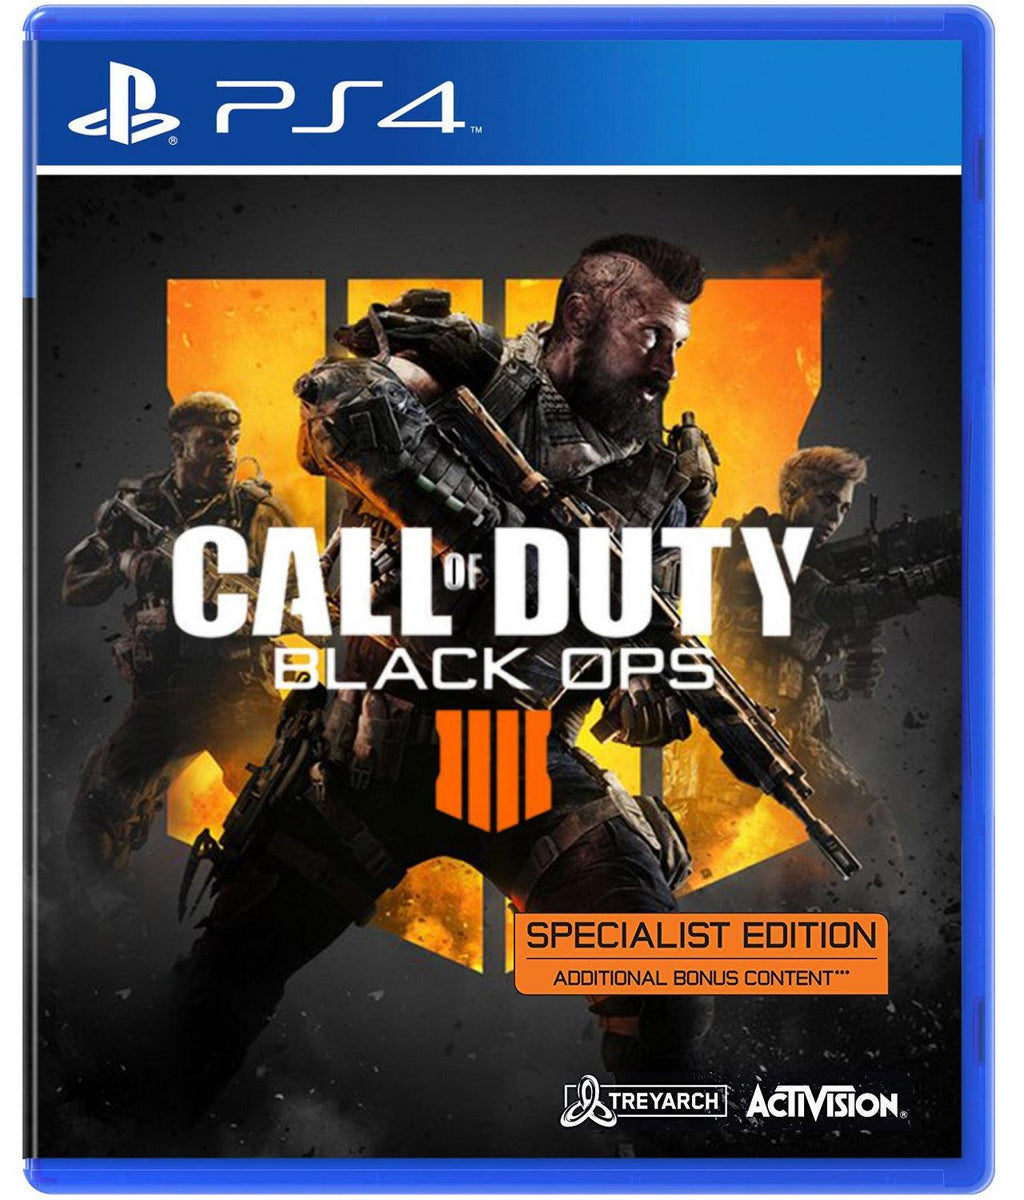 ps4 call of duty black ops 4 price